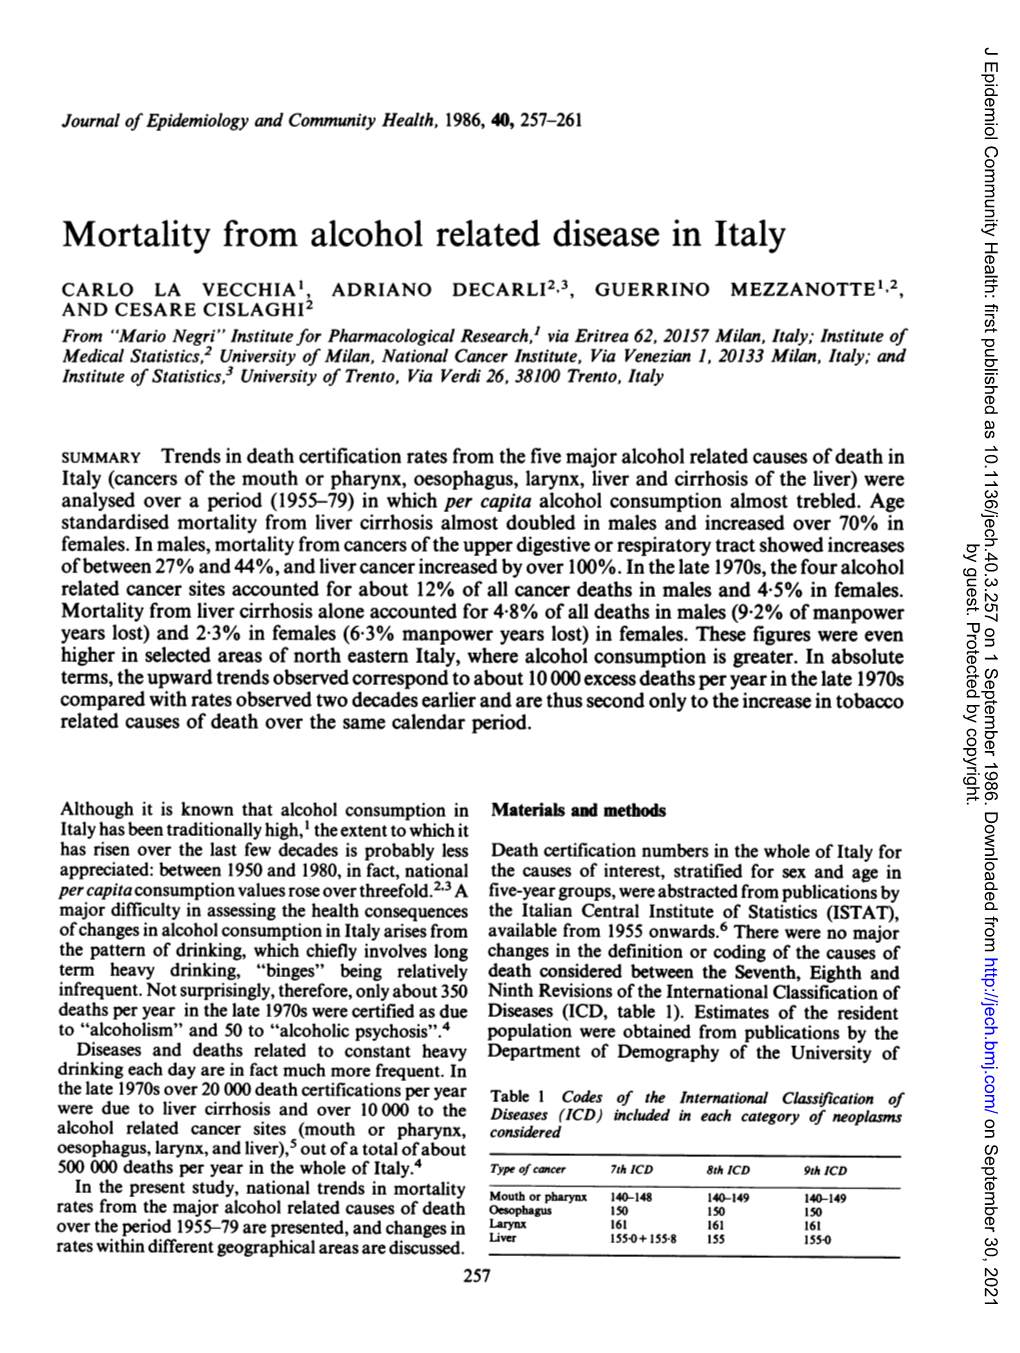 Mortality from Alcohol Relateddisease in Italy